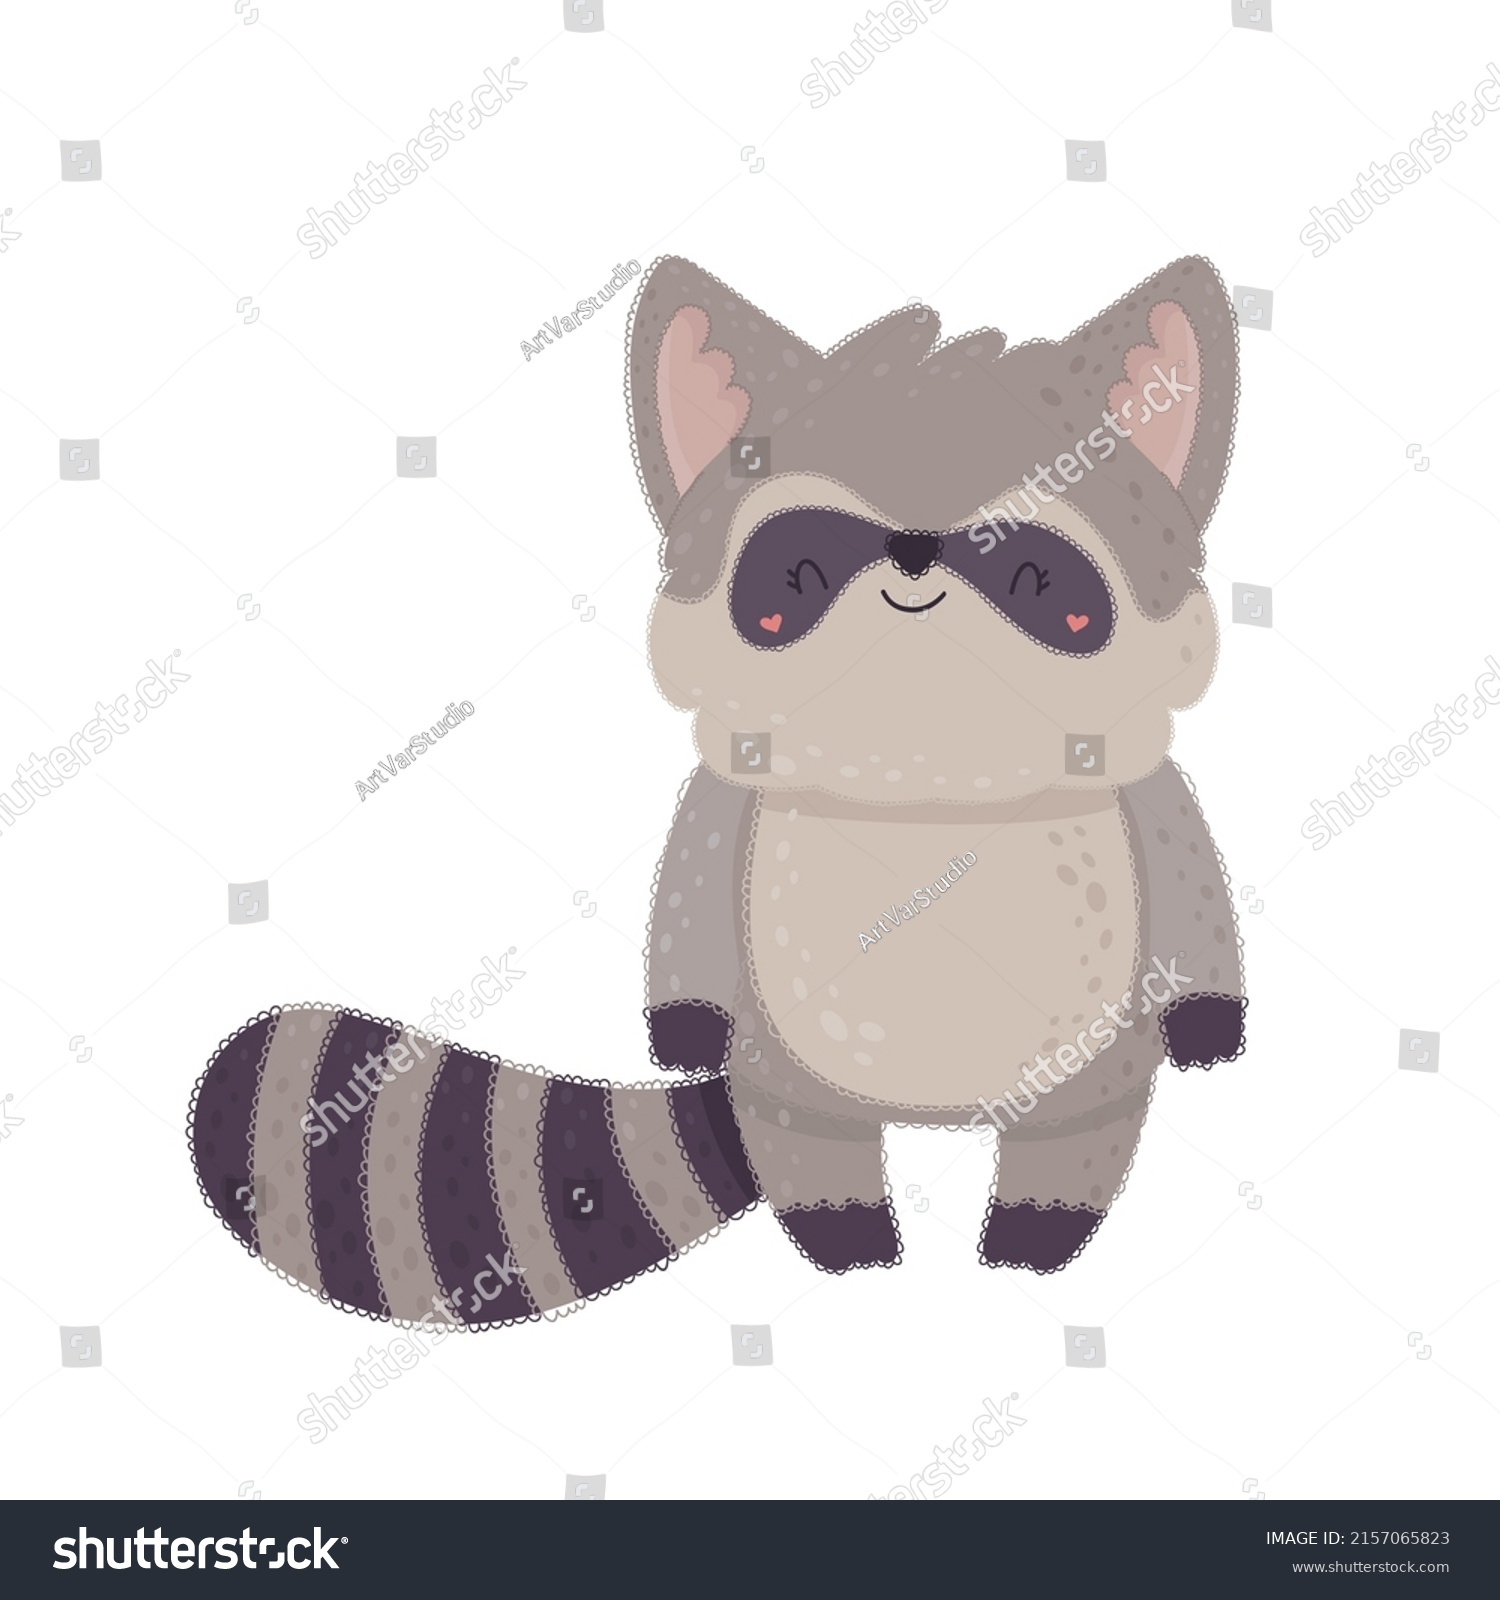 SVG of Beautiful cute raccoon holiday illustration. Vector illustration of a cute animal. Cute little illustration of racoon for kids, baby book, fairy tales, covers, baby shower invitation, textile t-shirt. svg